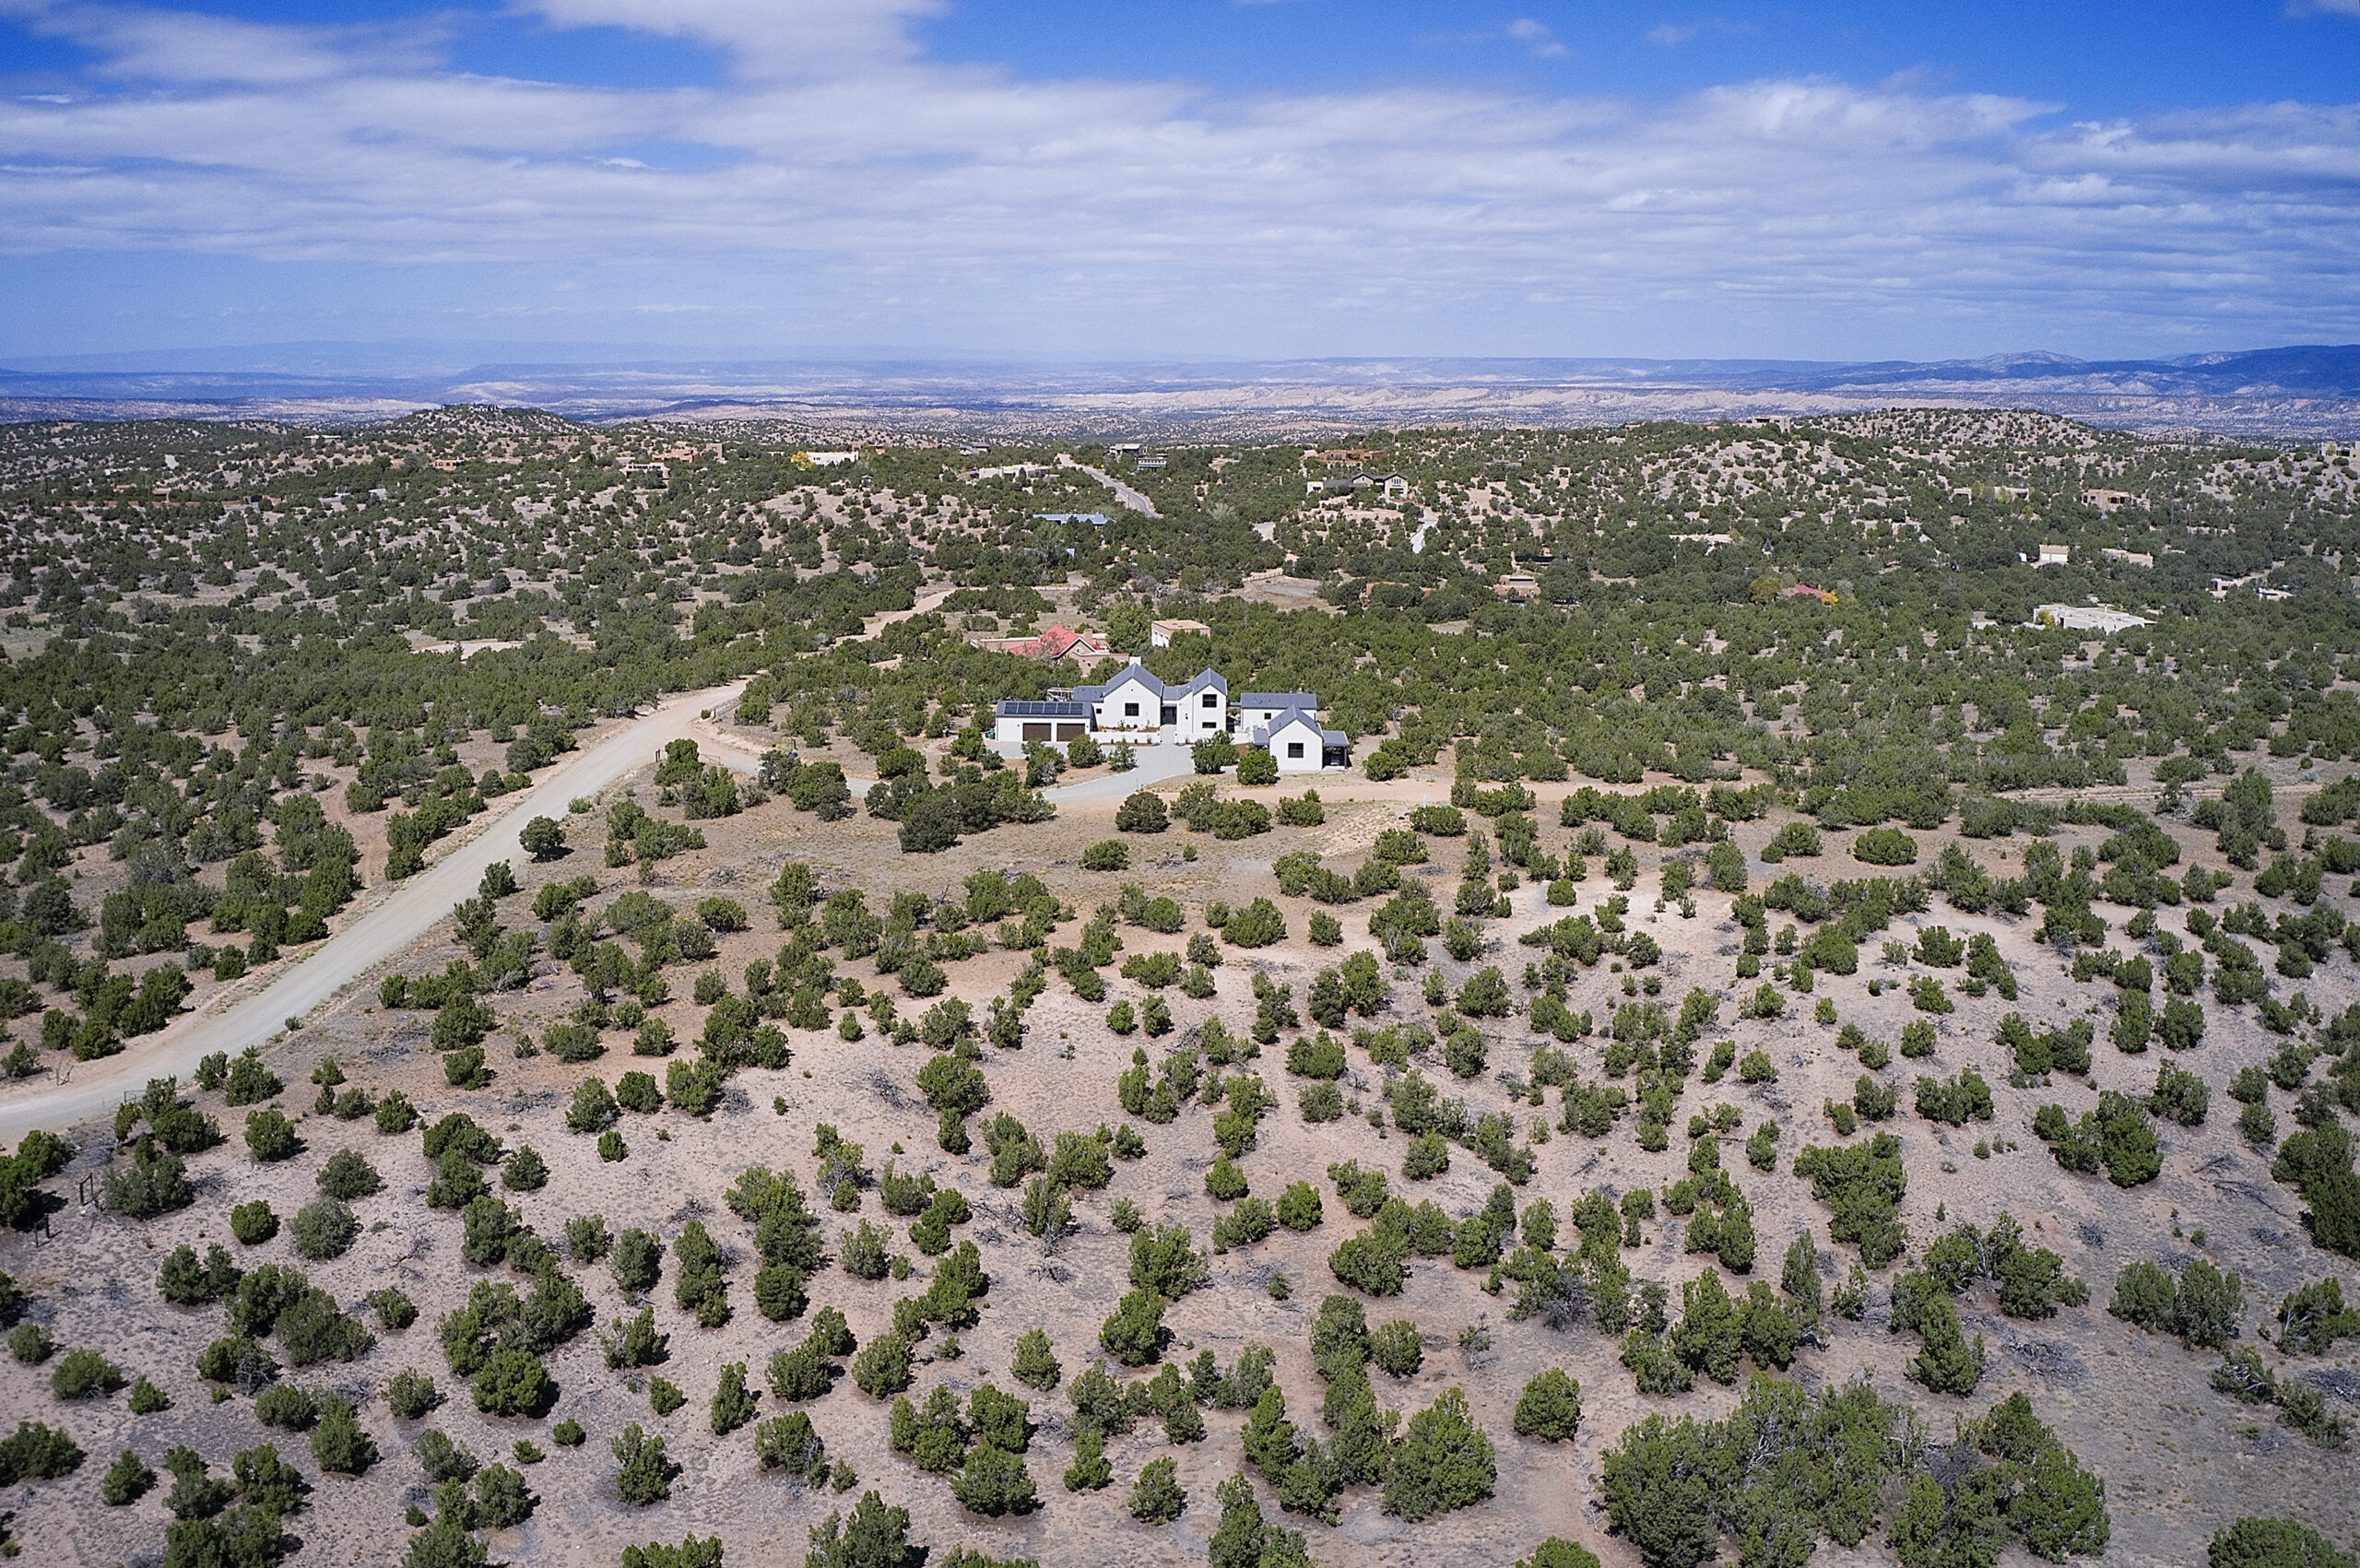 An architect's aerial view of a house in the desert.